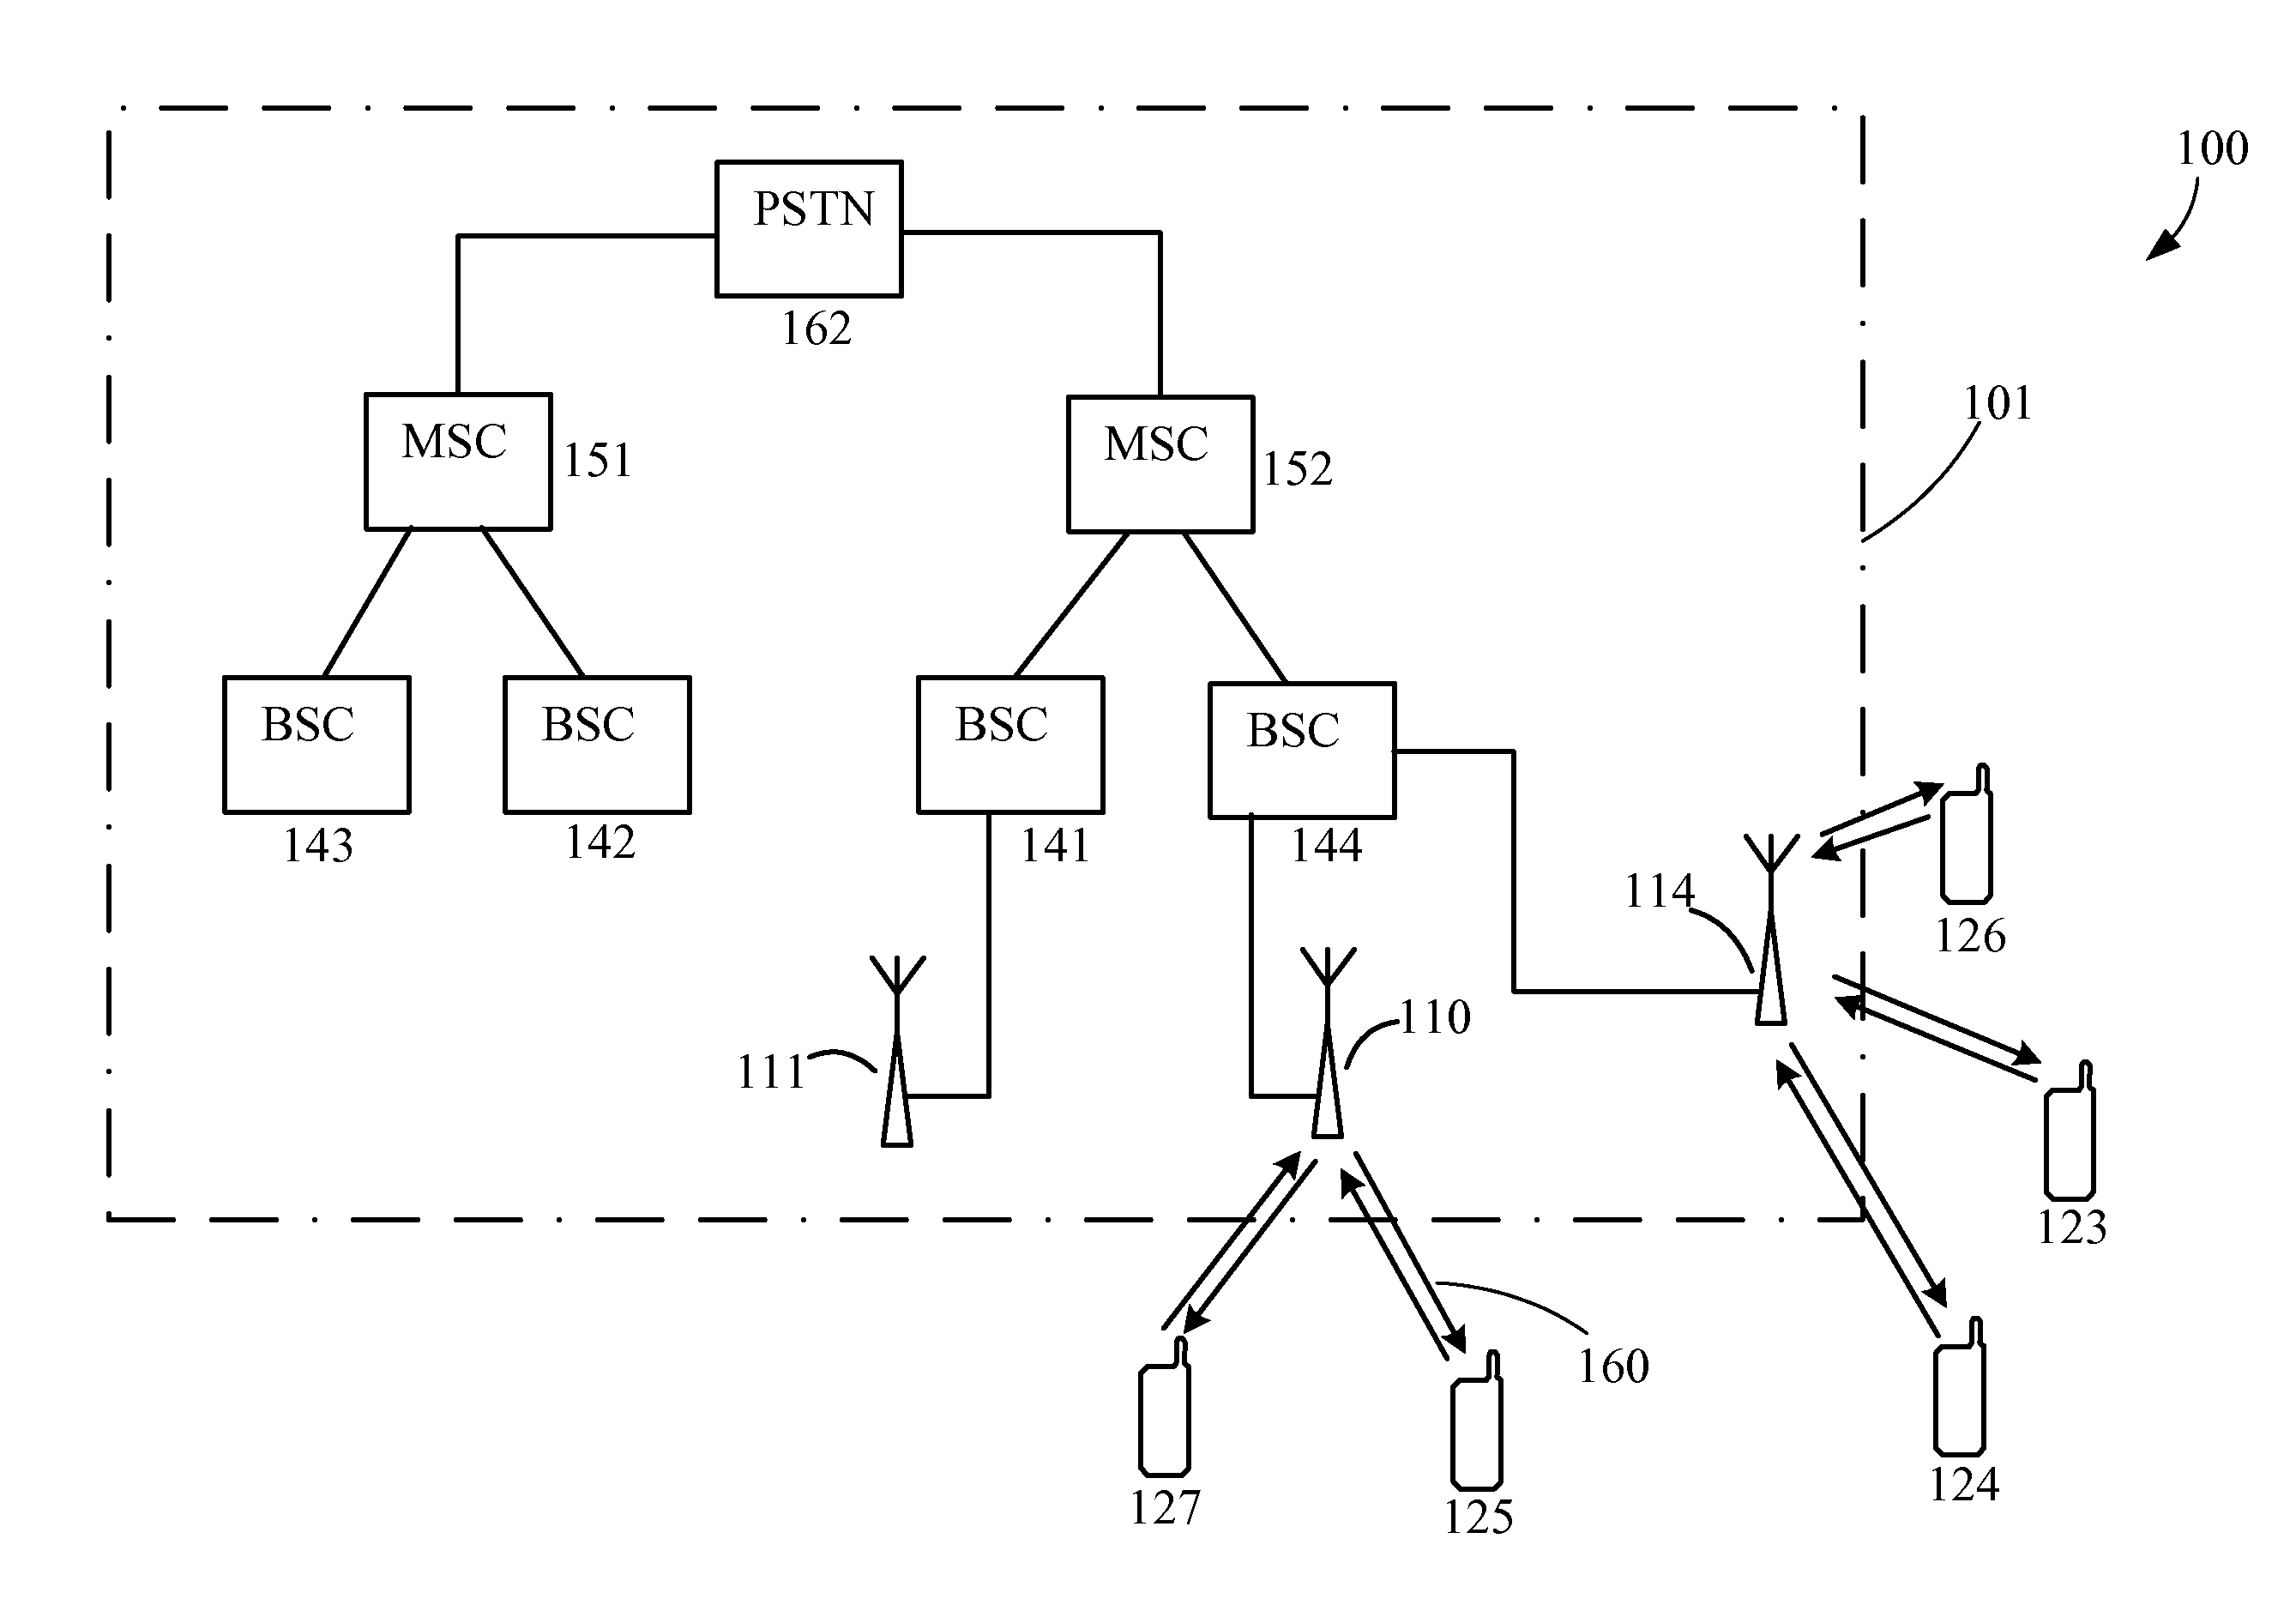 Method and apparatus for assigning wireless network packet resources to wireless terminals